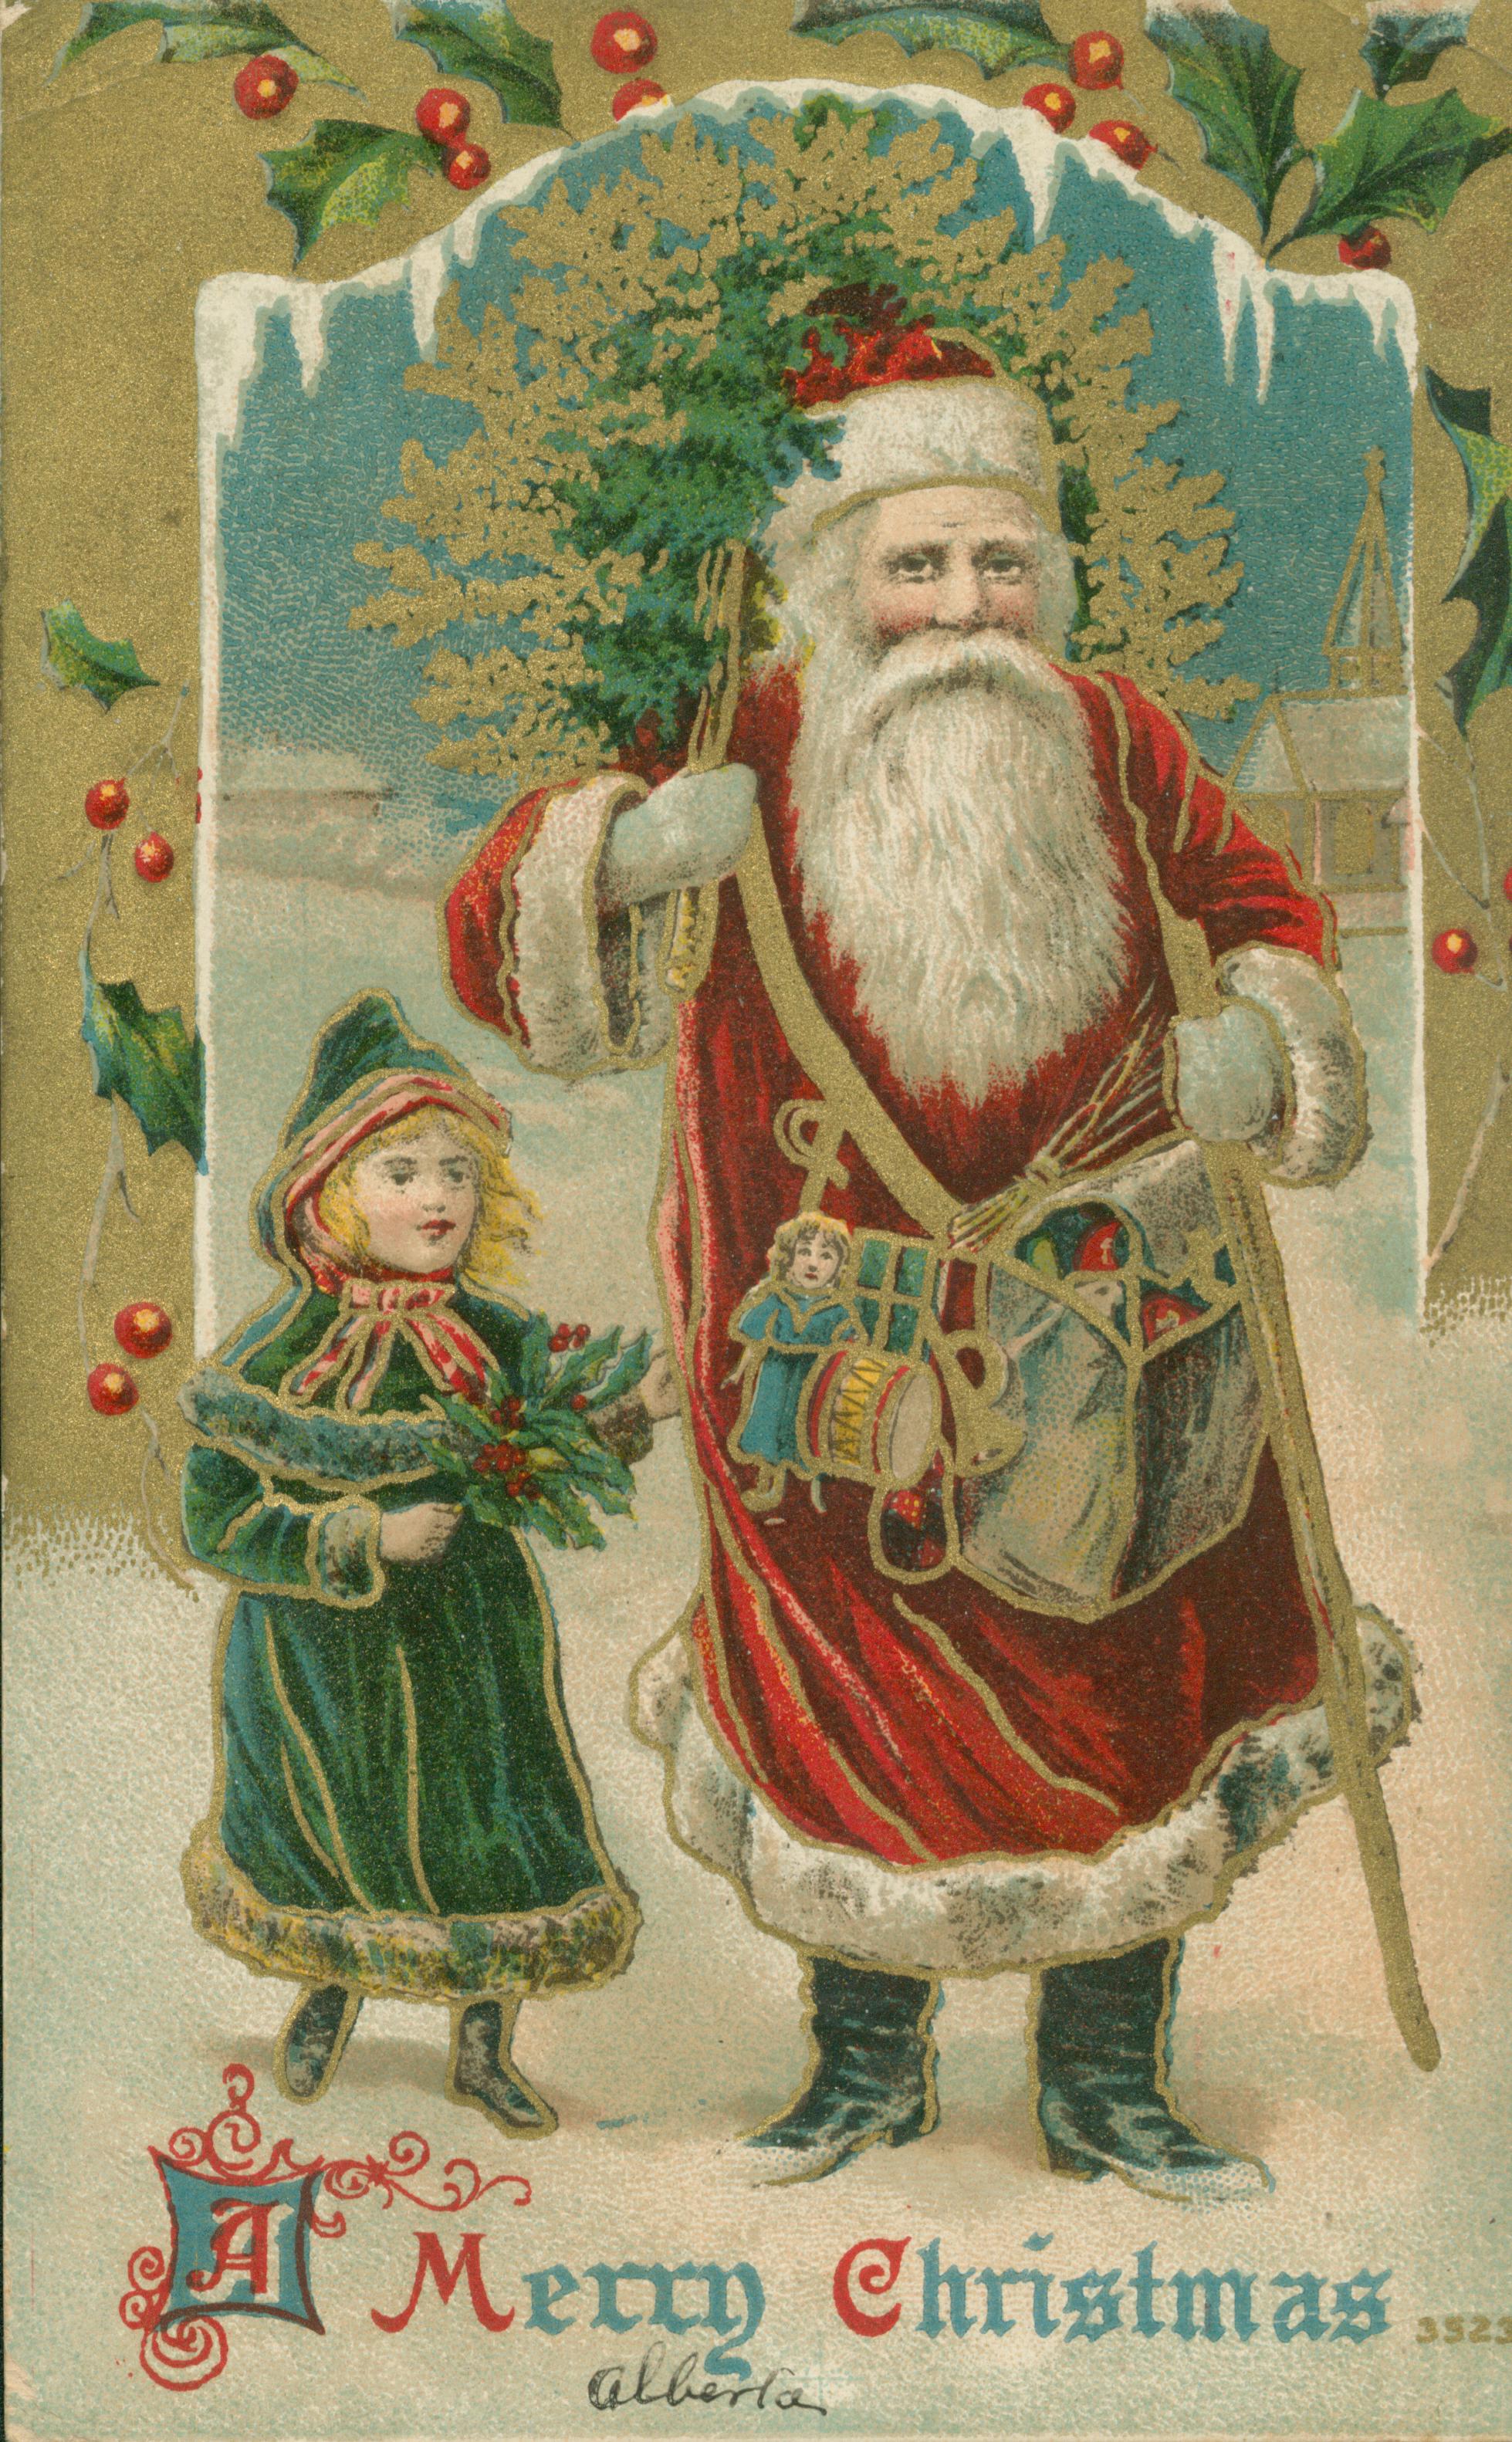 Shows Santa Claus standing next to a child